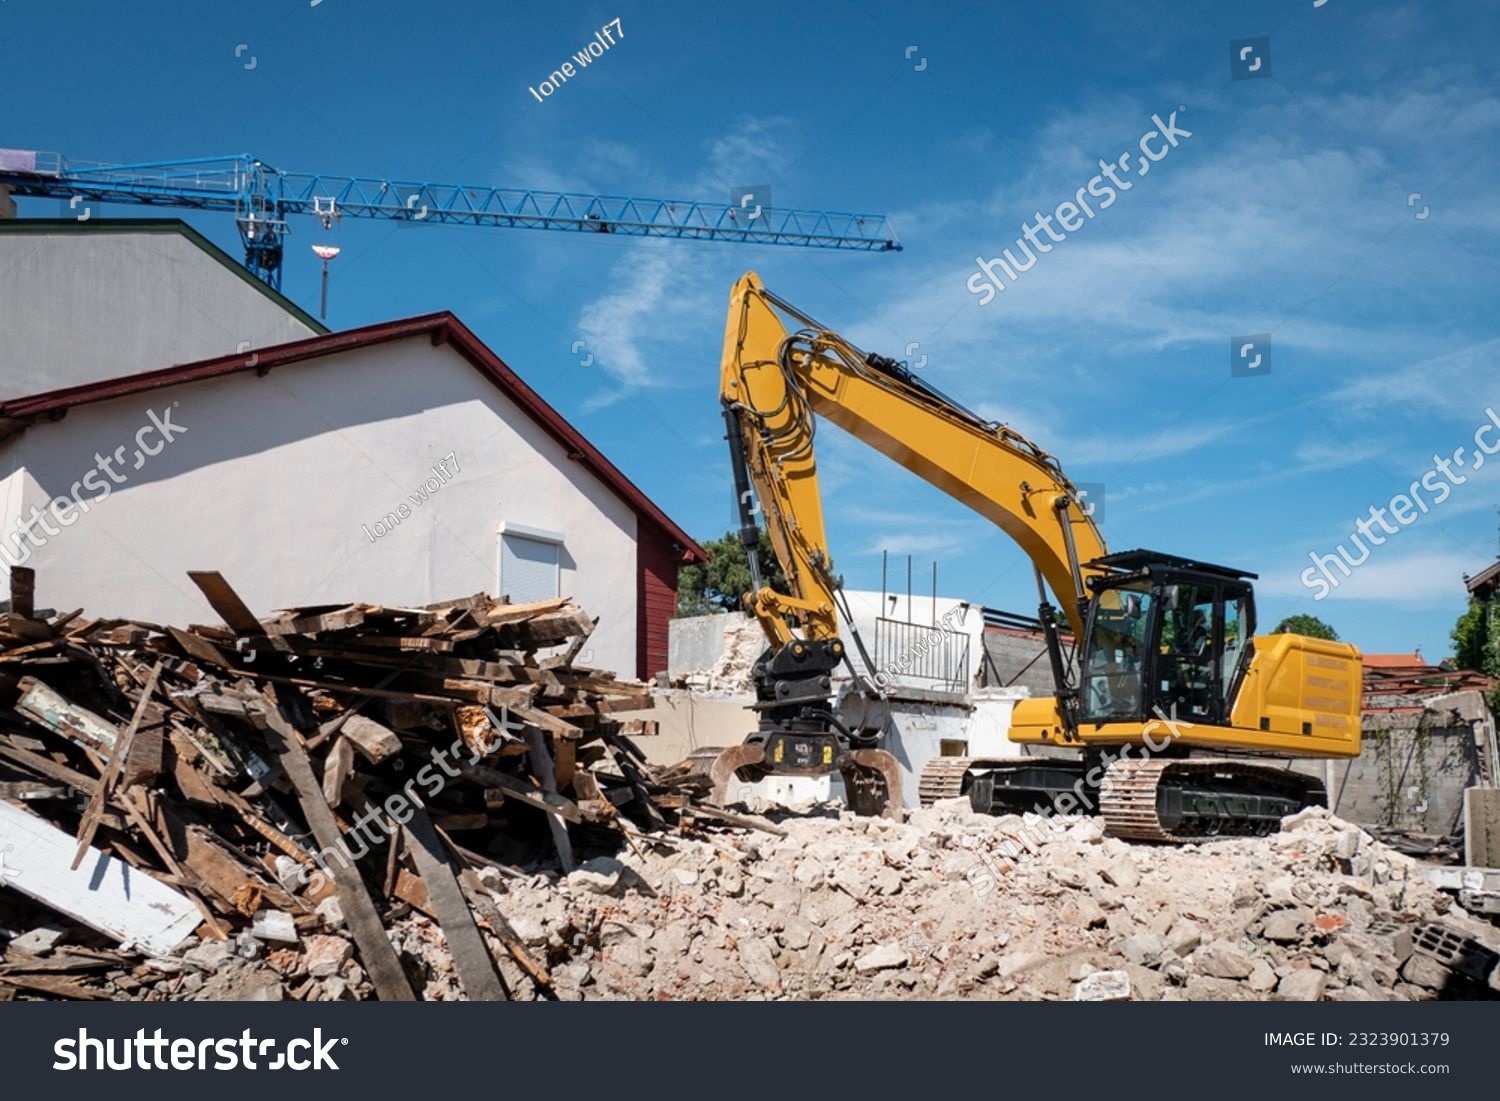 Excavator demolishing an old house for later construction on the site #2323901379